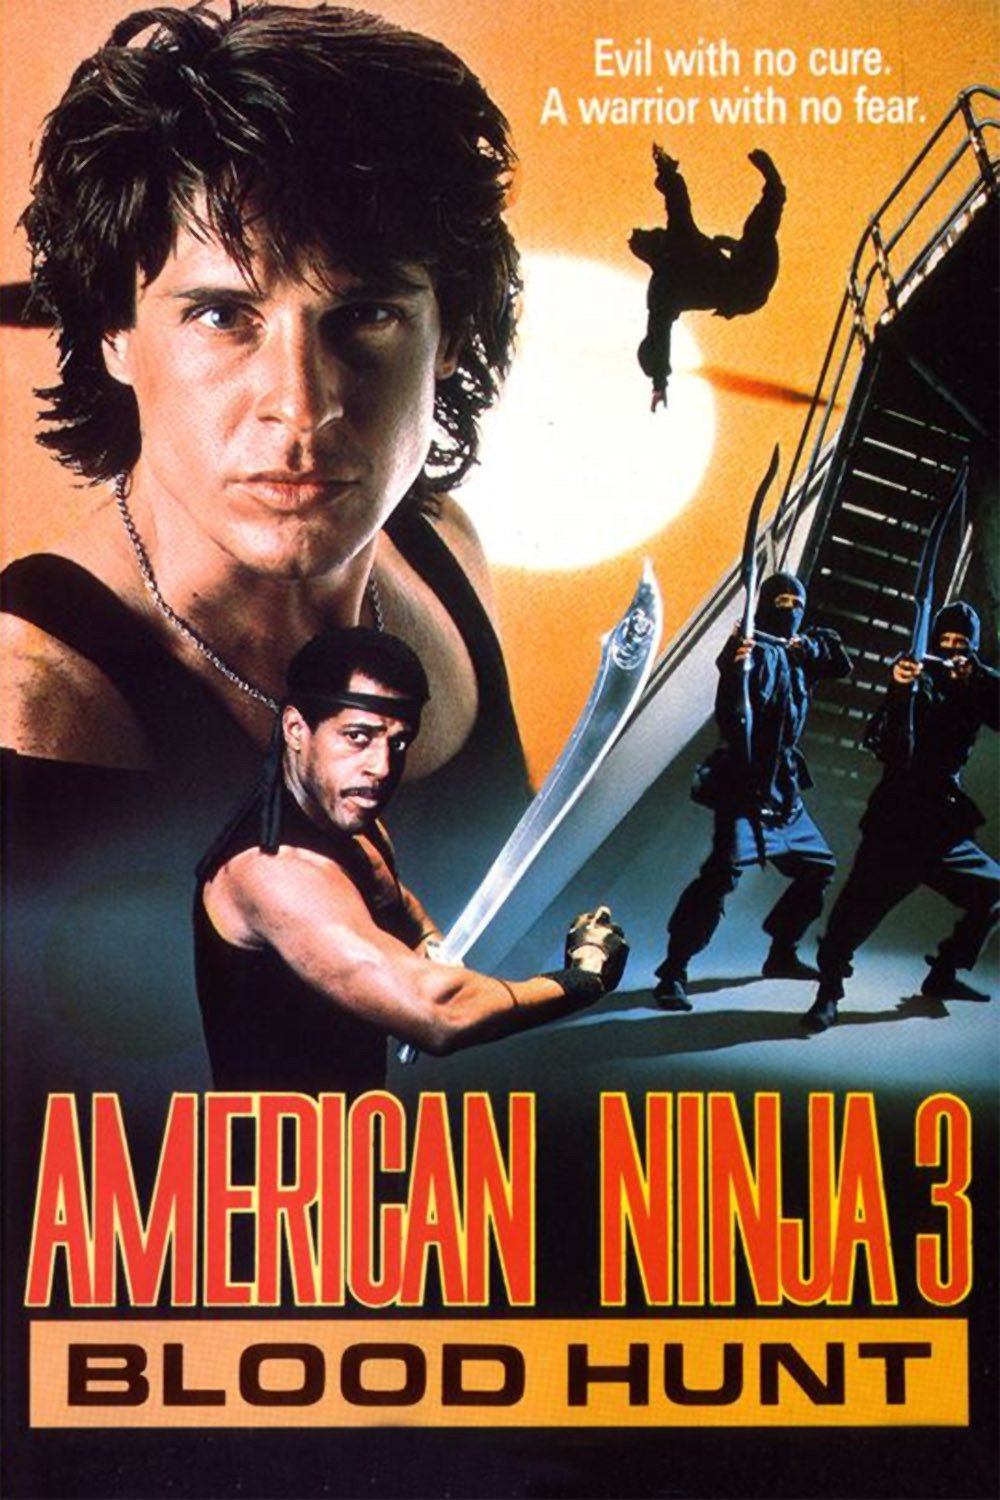 Poster for the movie "American Ninja 3: Blood Hunt"